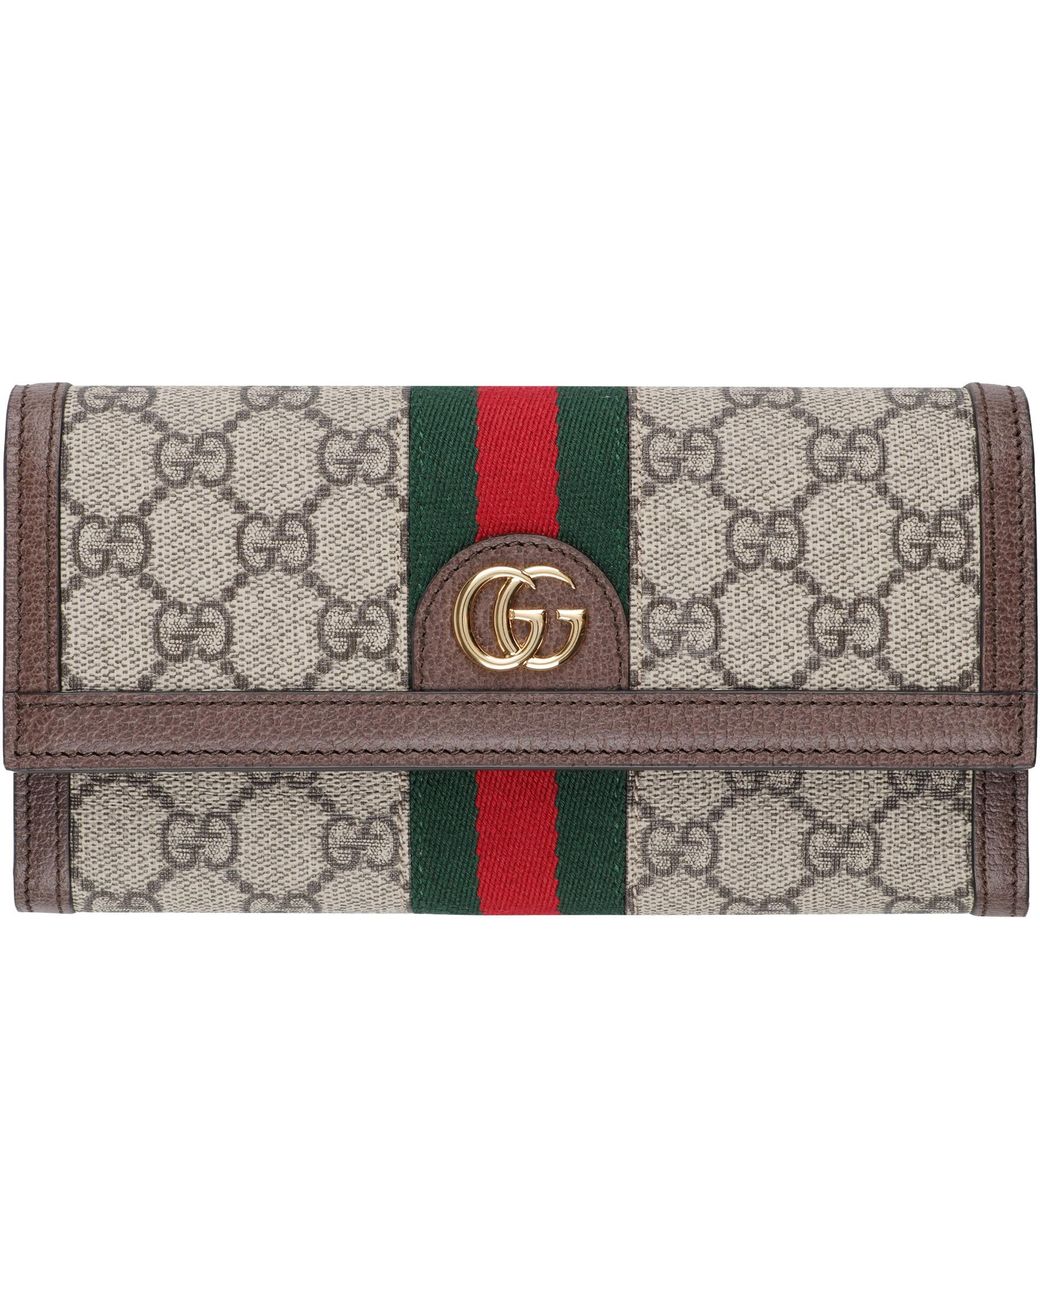 Gucci Canvas Ophidia gg Continental Wallet in Brown/Beige (Brown 